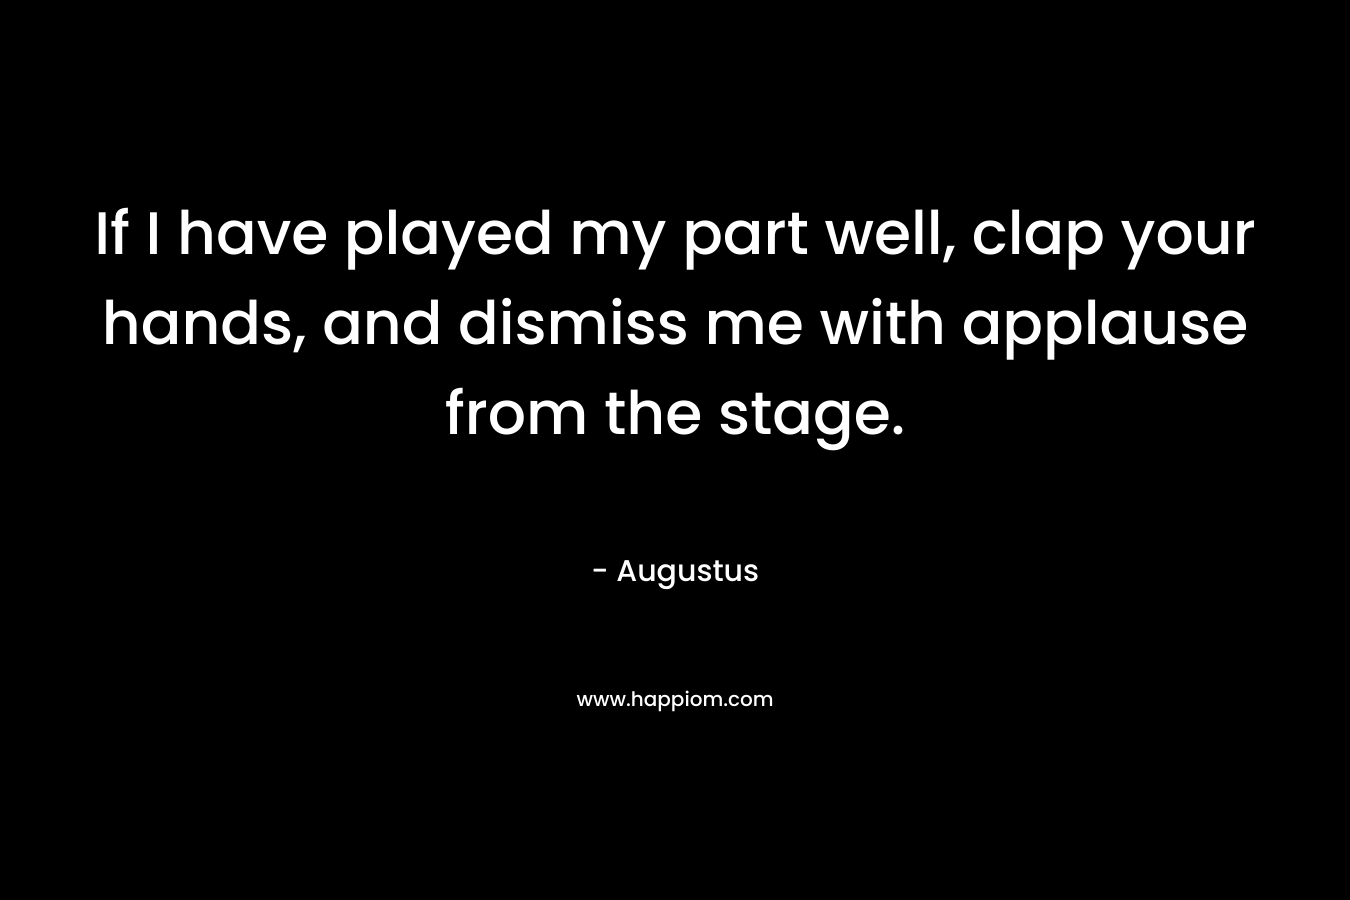 If I have played my part well, clap your hands, and dismiss me with applause from the stage. – Augustus